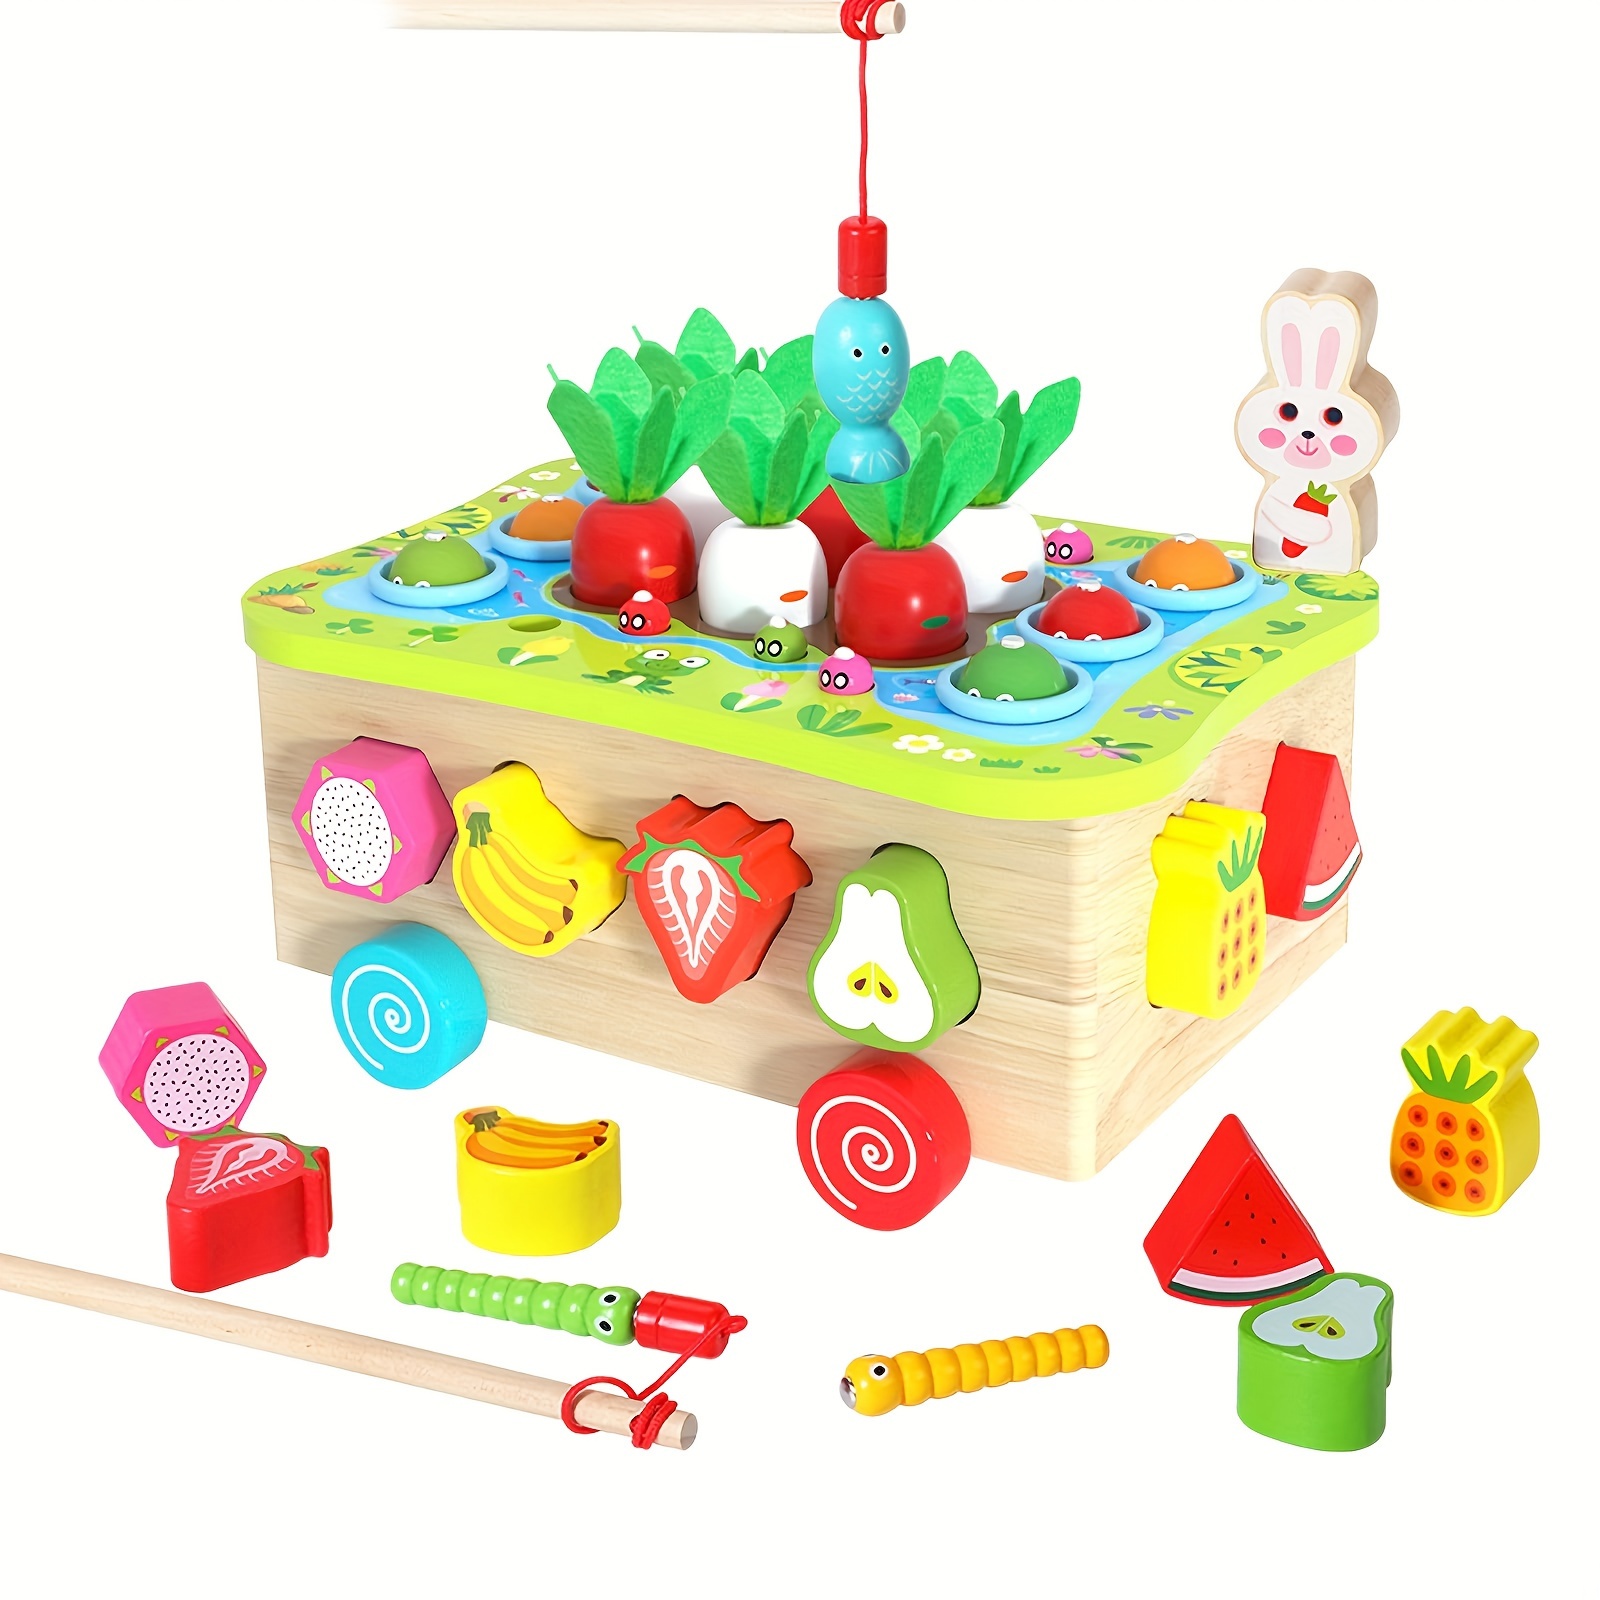 Play Brainy Peg Toy Set Exciting Montessori Style Learning Toy Colorful Stacking Peg Board Toy for Toddlers & Preschoolers Perfect for Color